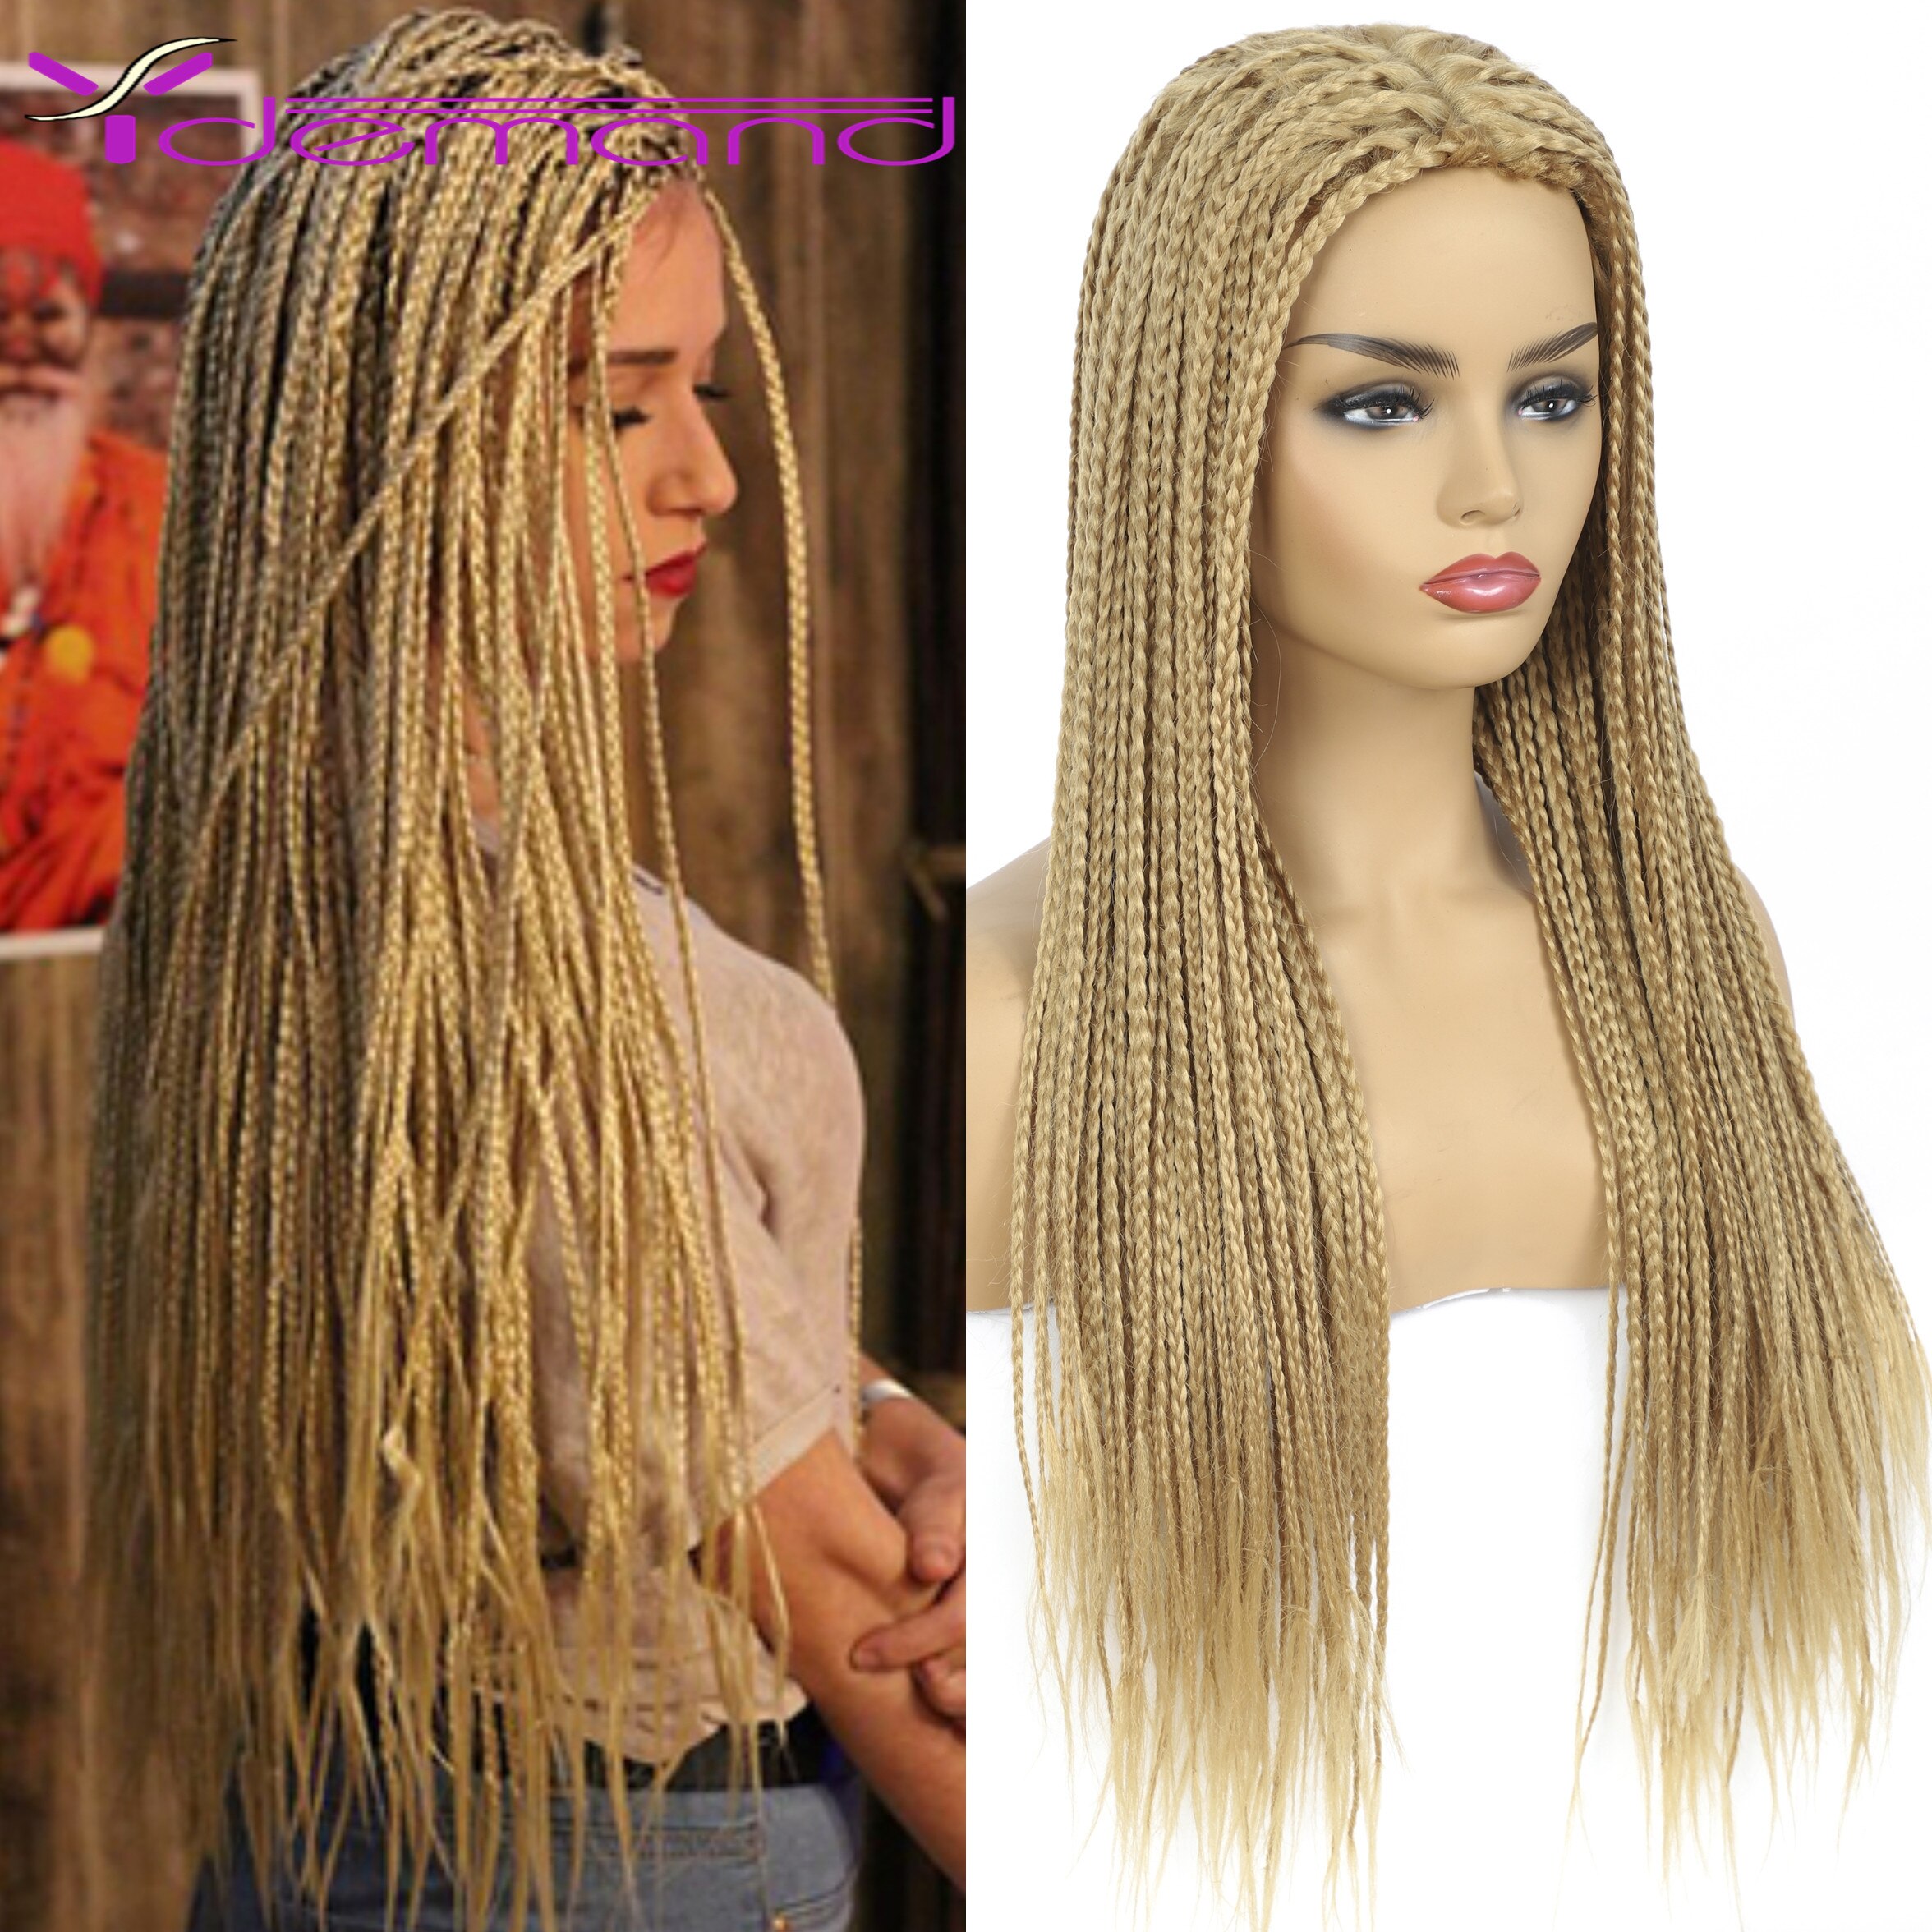 Y Demand Wigs Braids With Box Long Black Synthetic None Lace Wigs for Women Heat Resistant Cosplay Wig Two Tone Braided